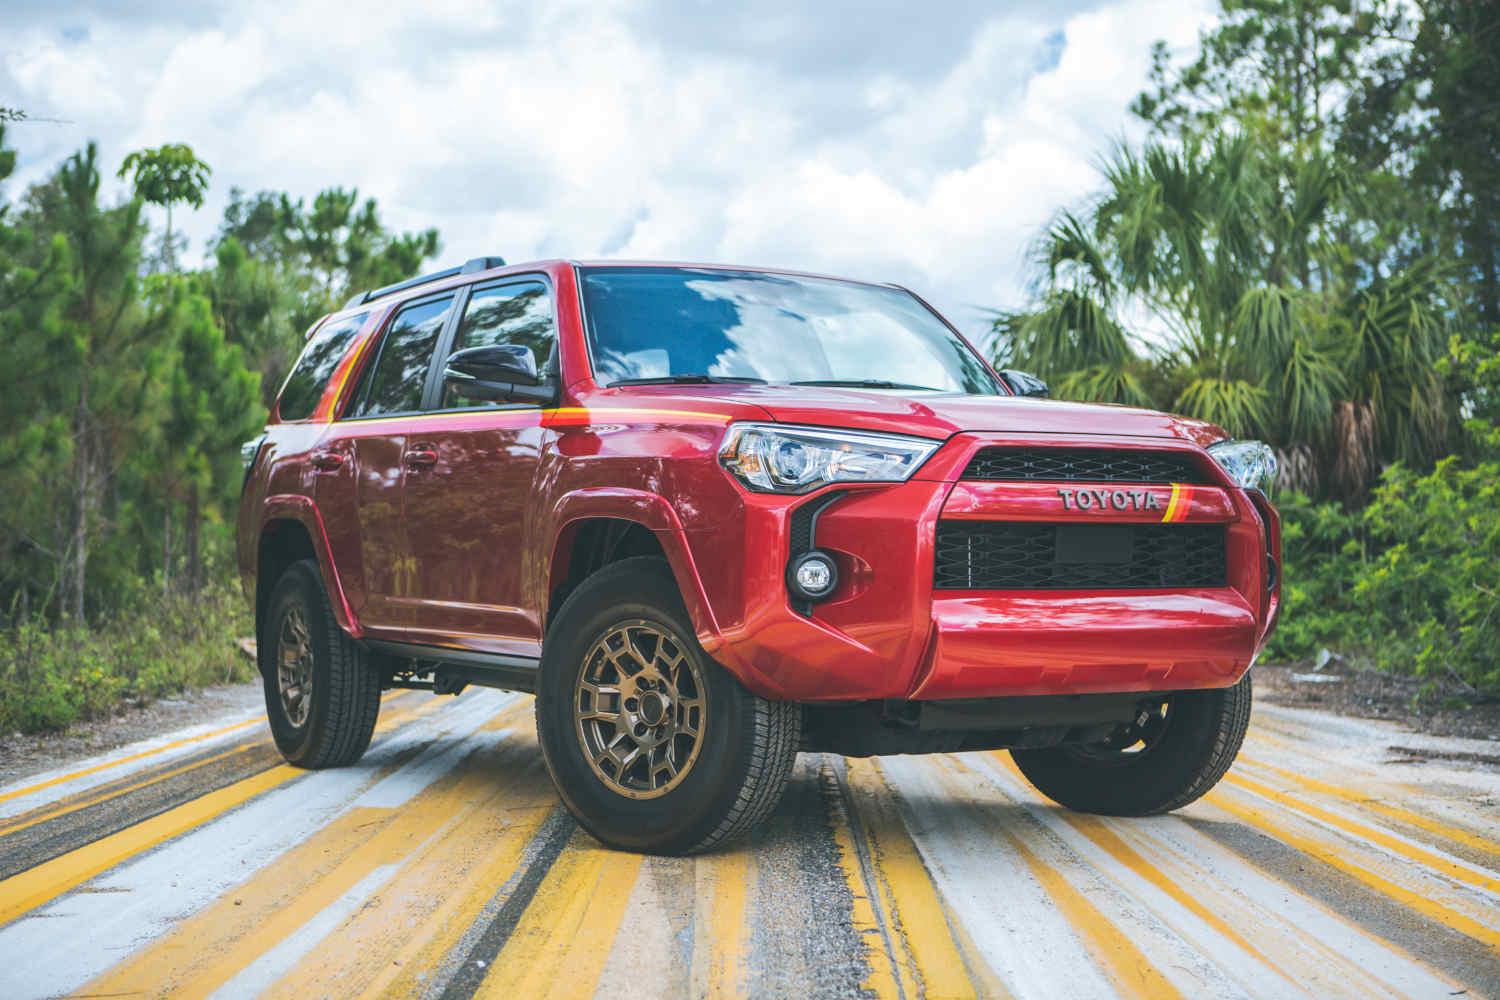 The 2023 Toyota 4Runner SUV on a painted road